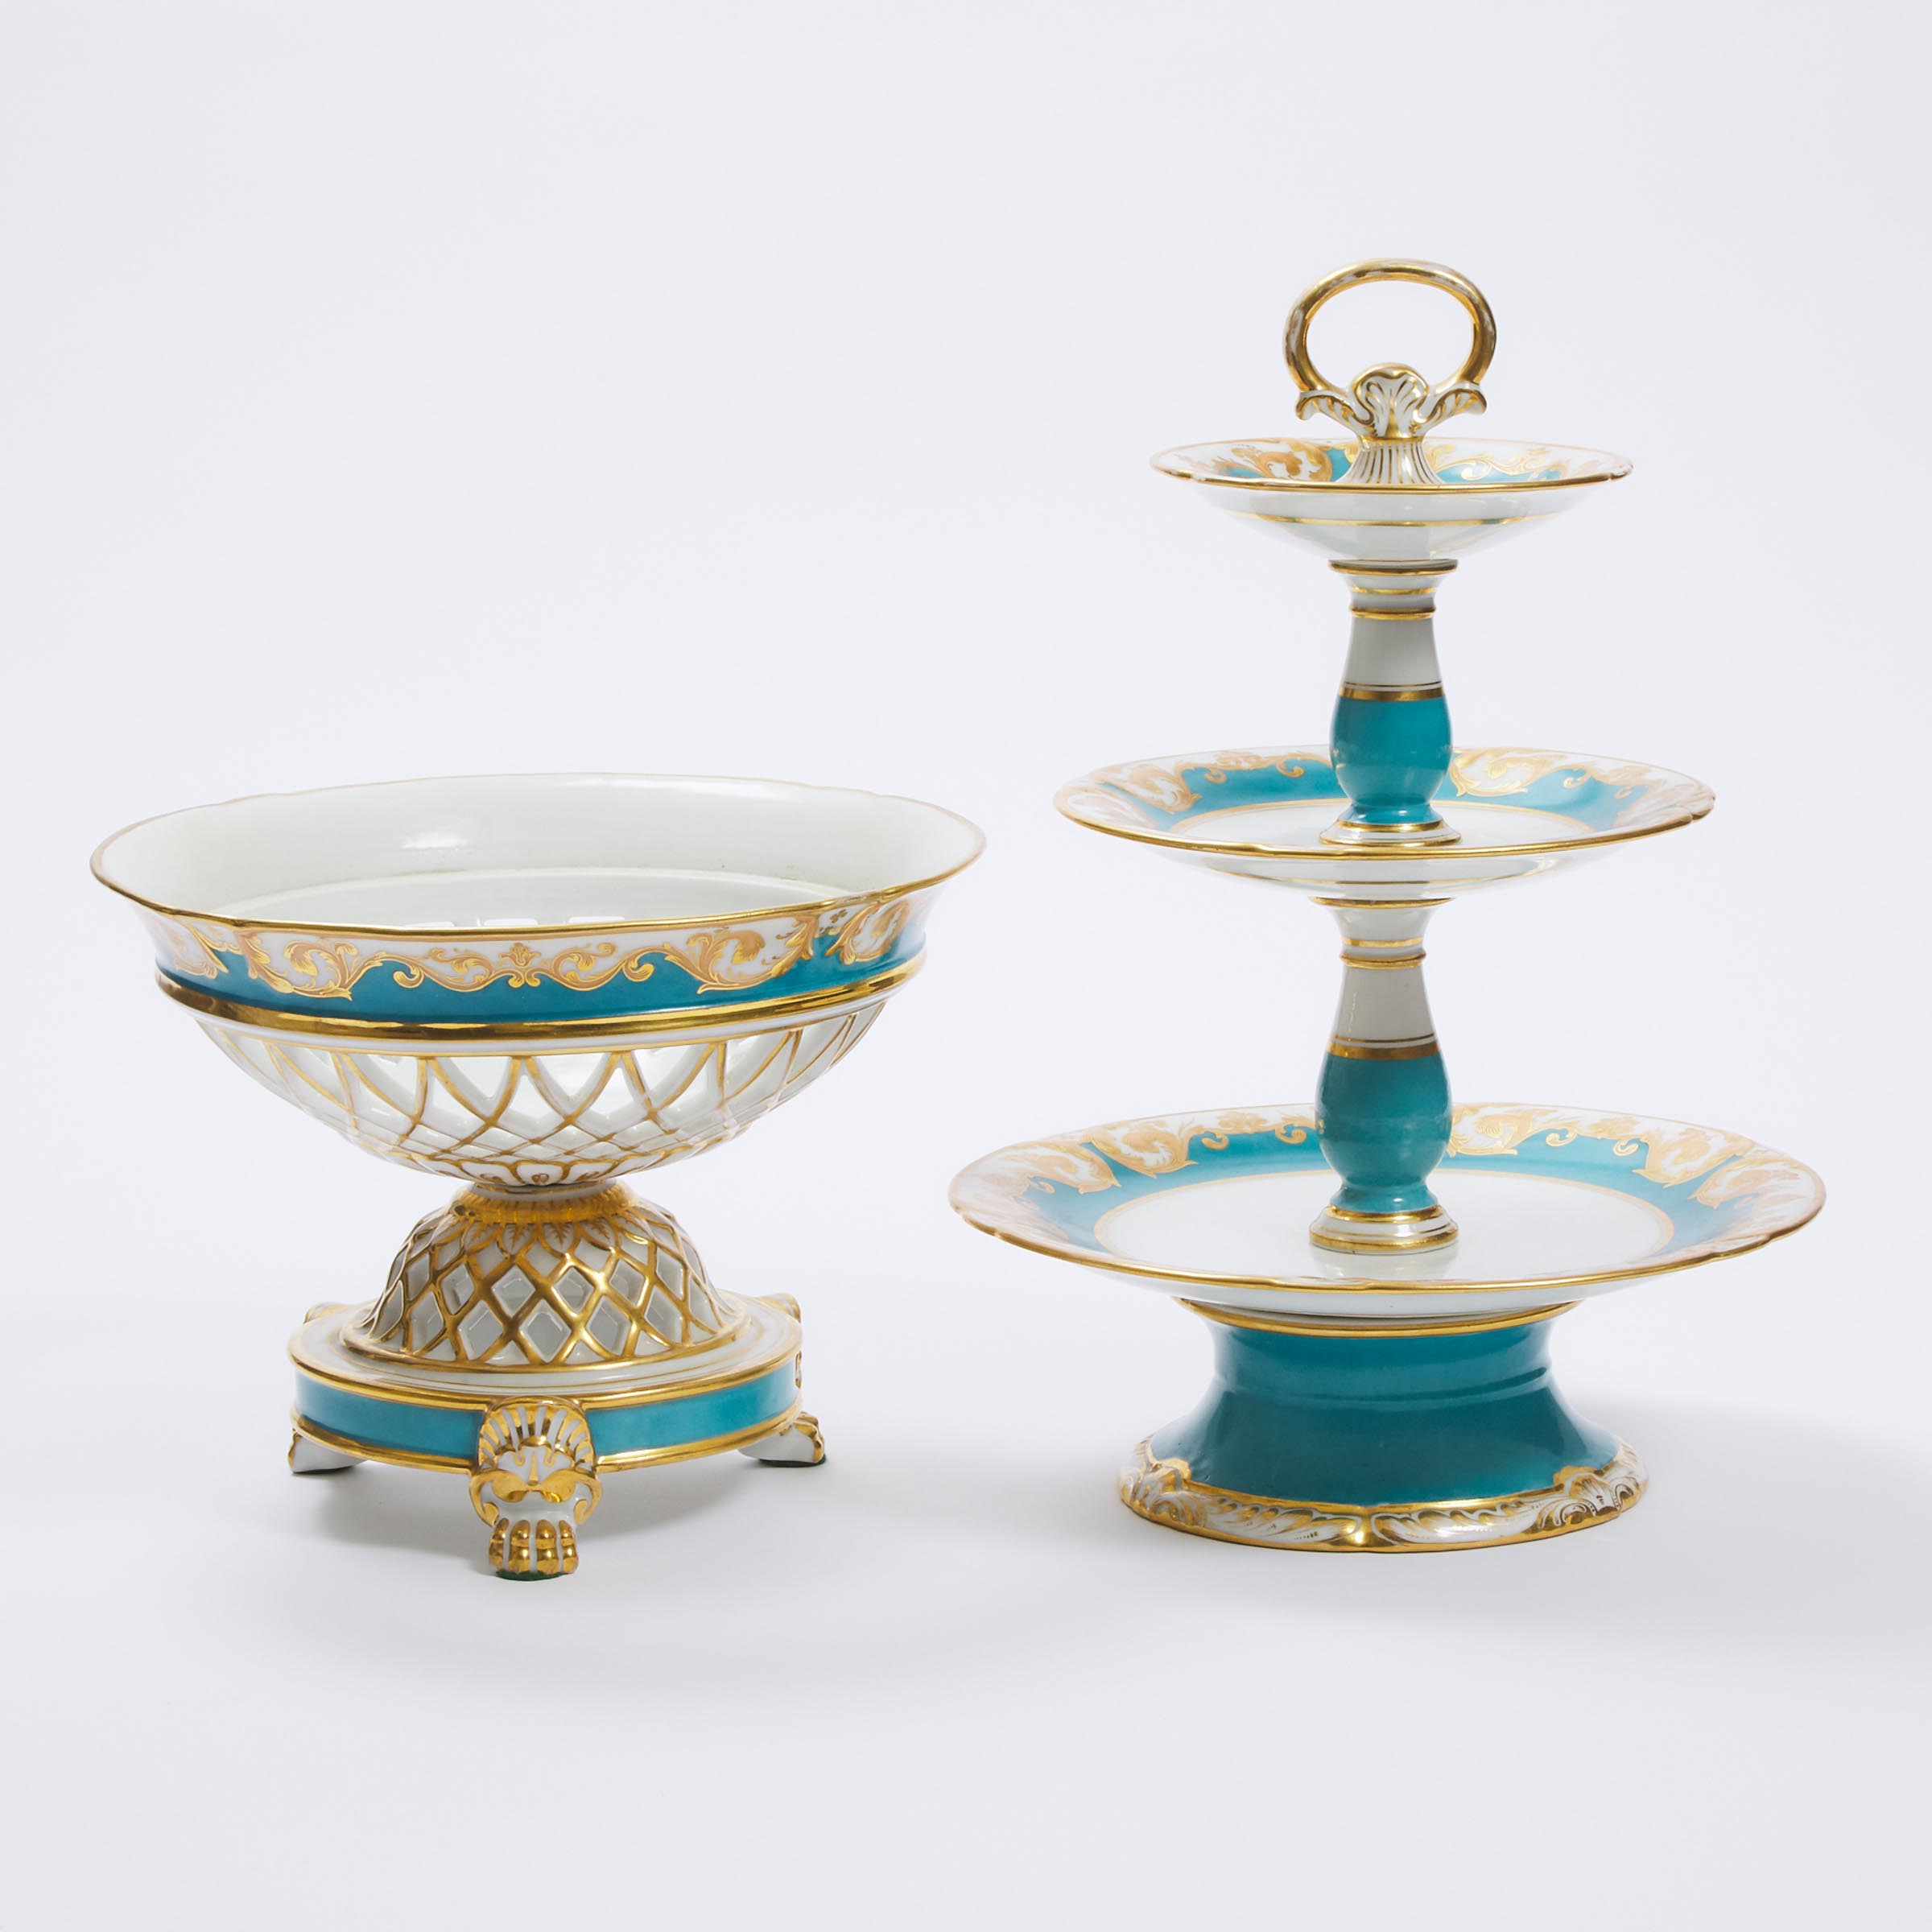 Paris Porcelain Pierced Comport and Three-Tier Cake Stand, 19th century